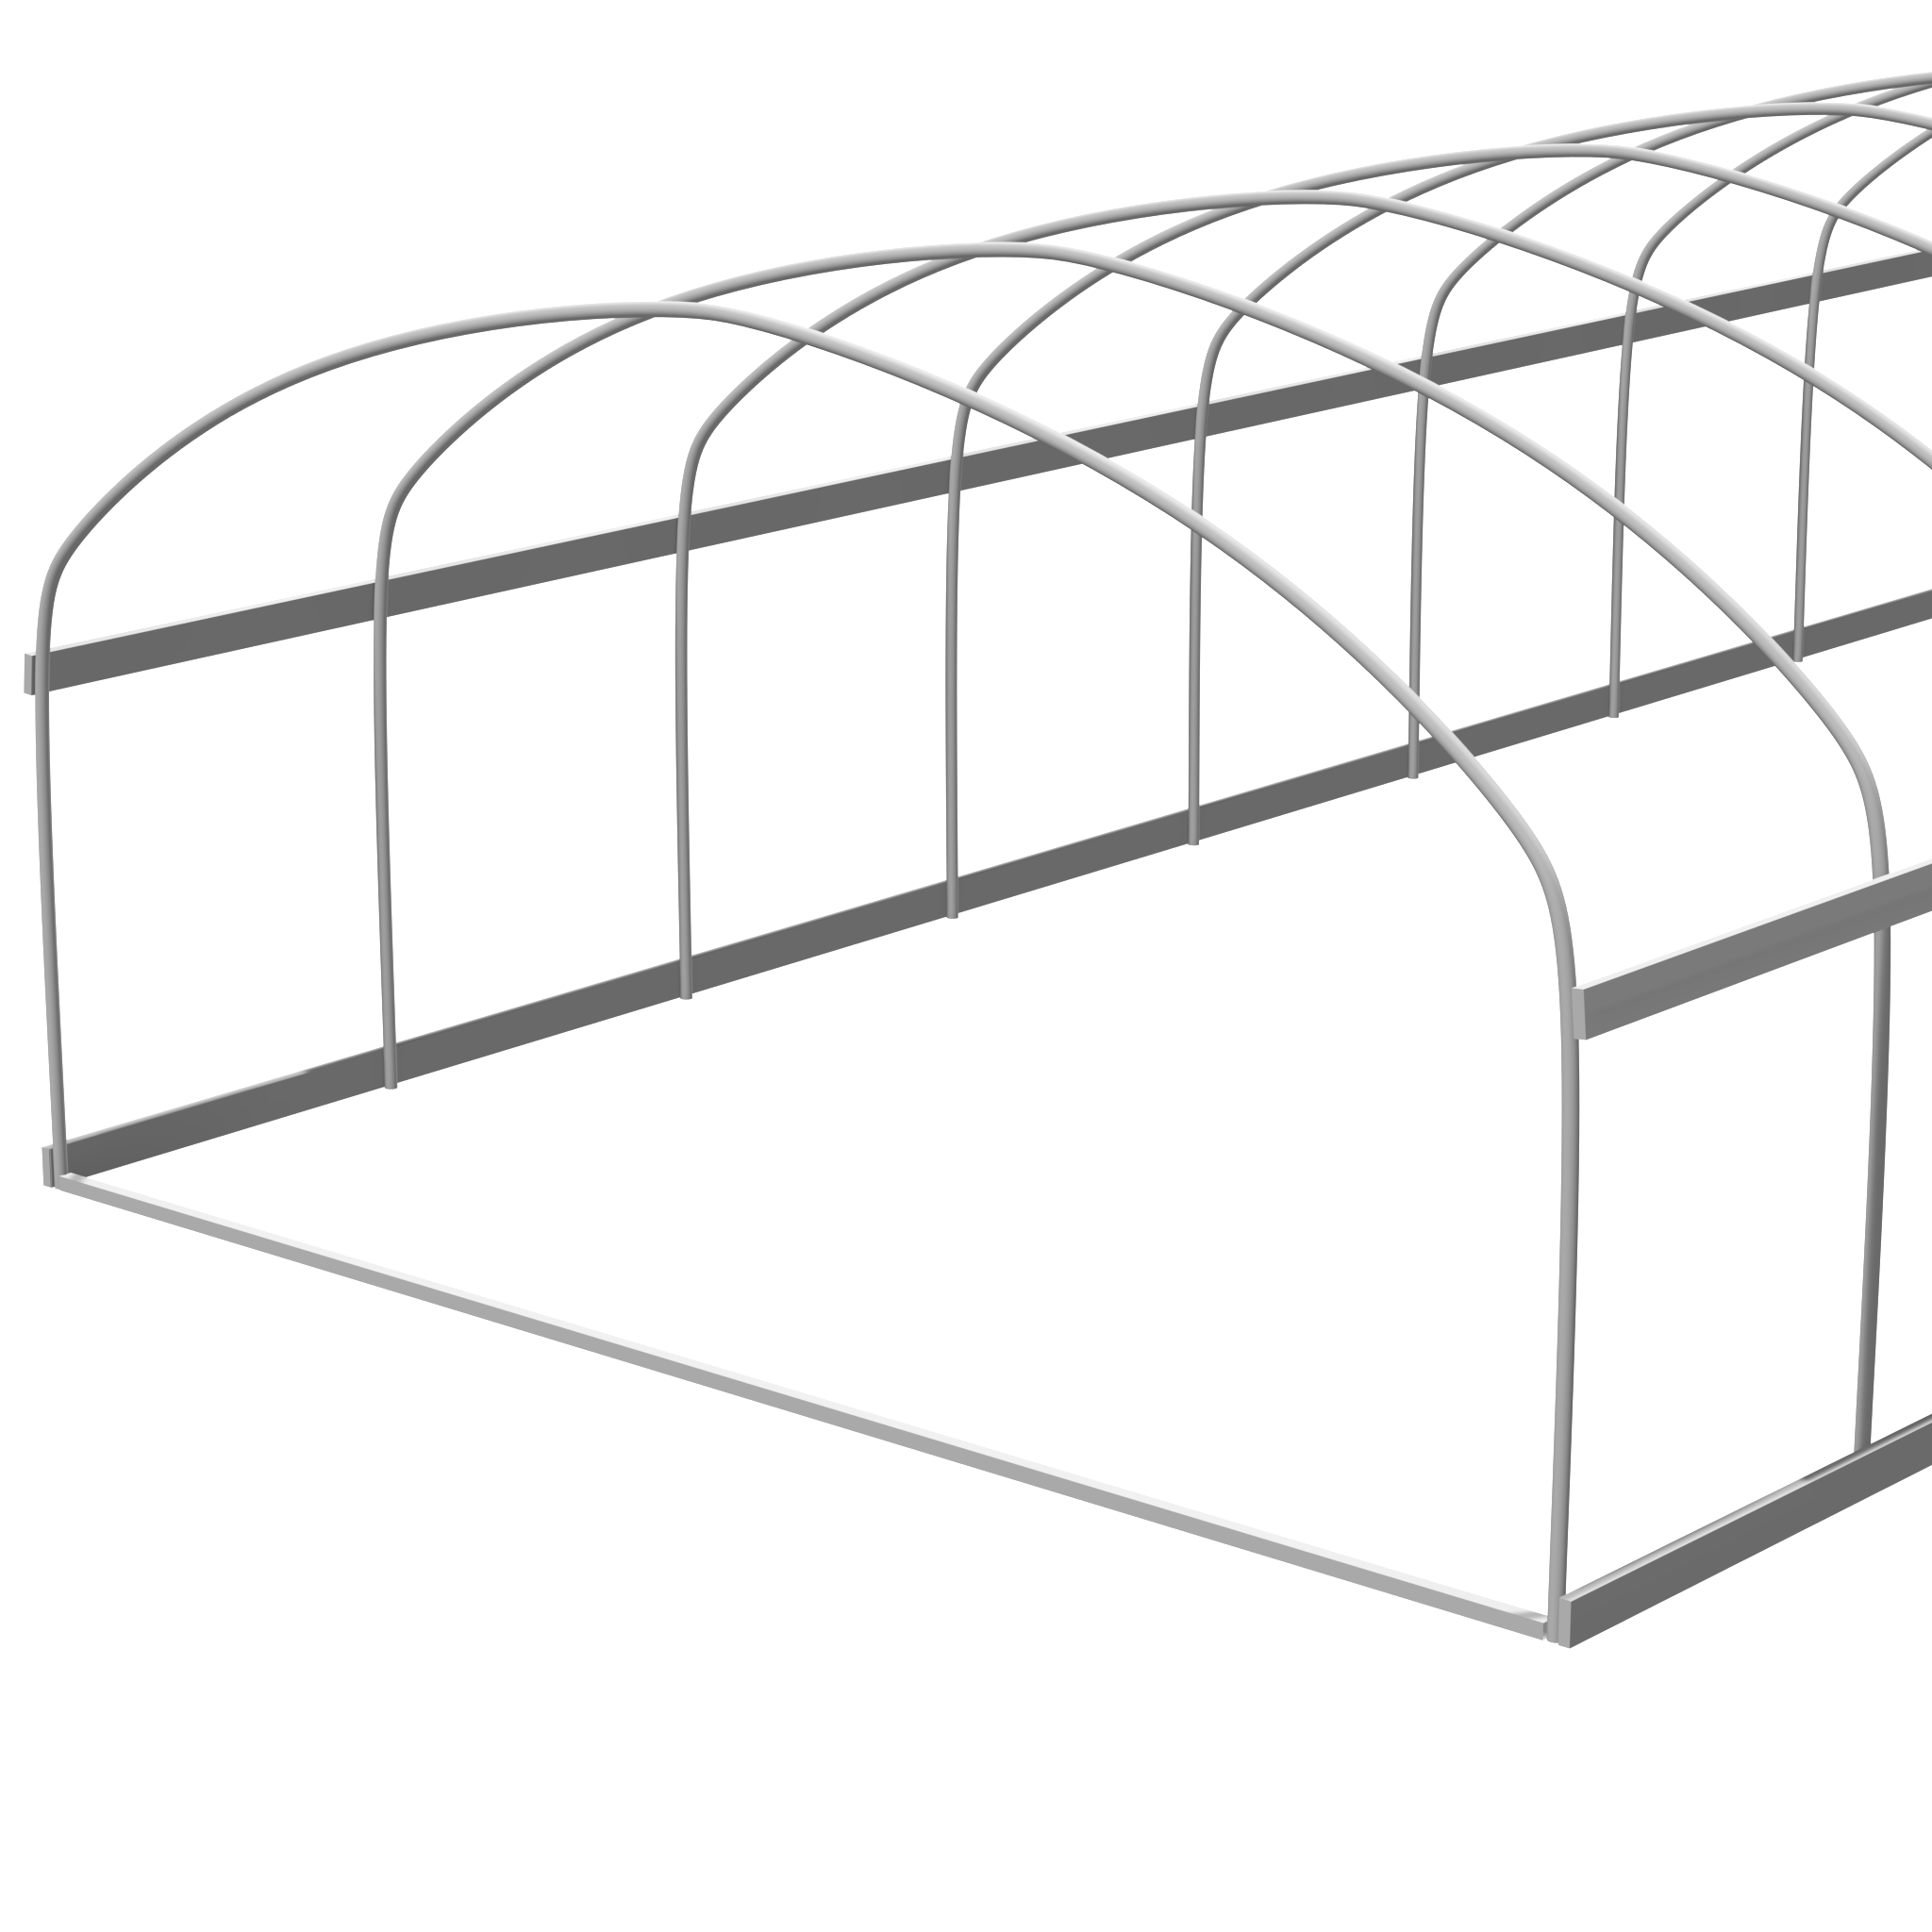 20'x60' Greenhouse Frame Quonset